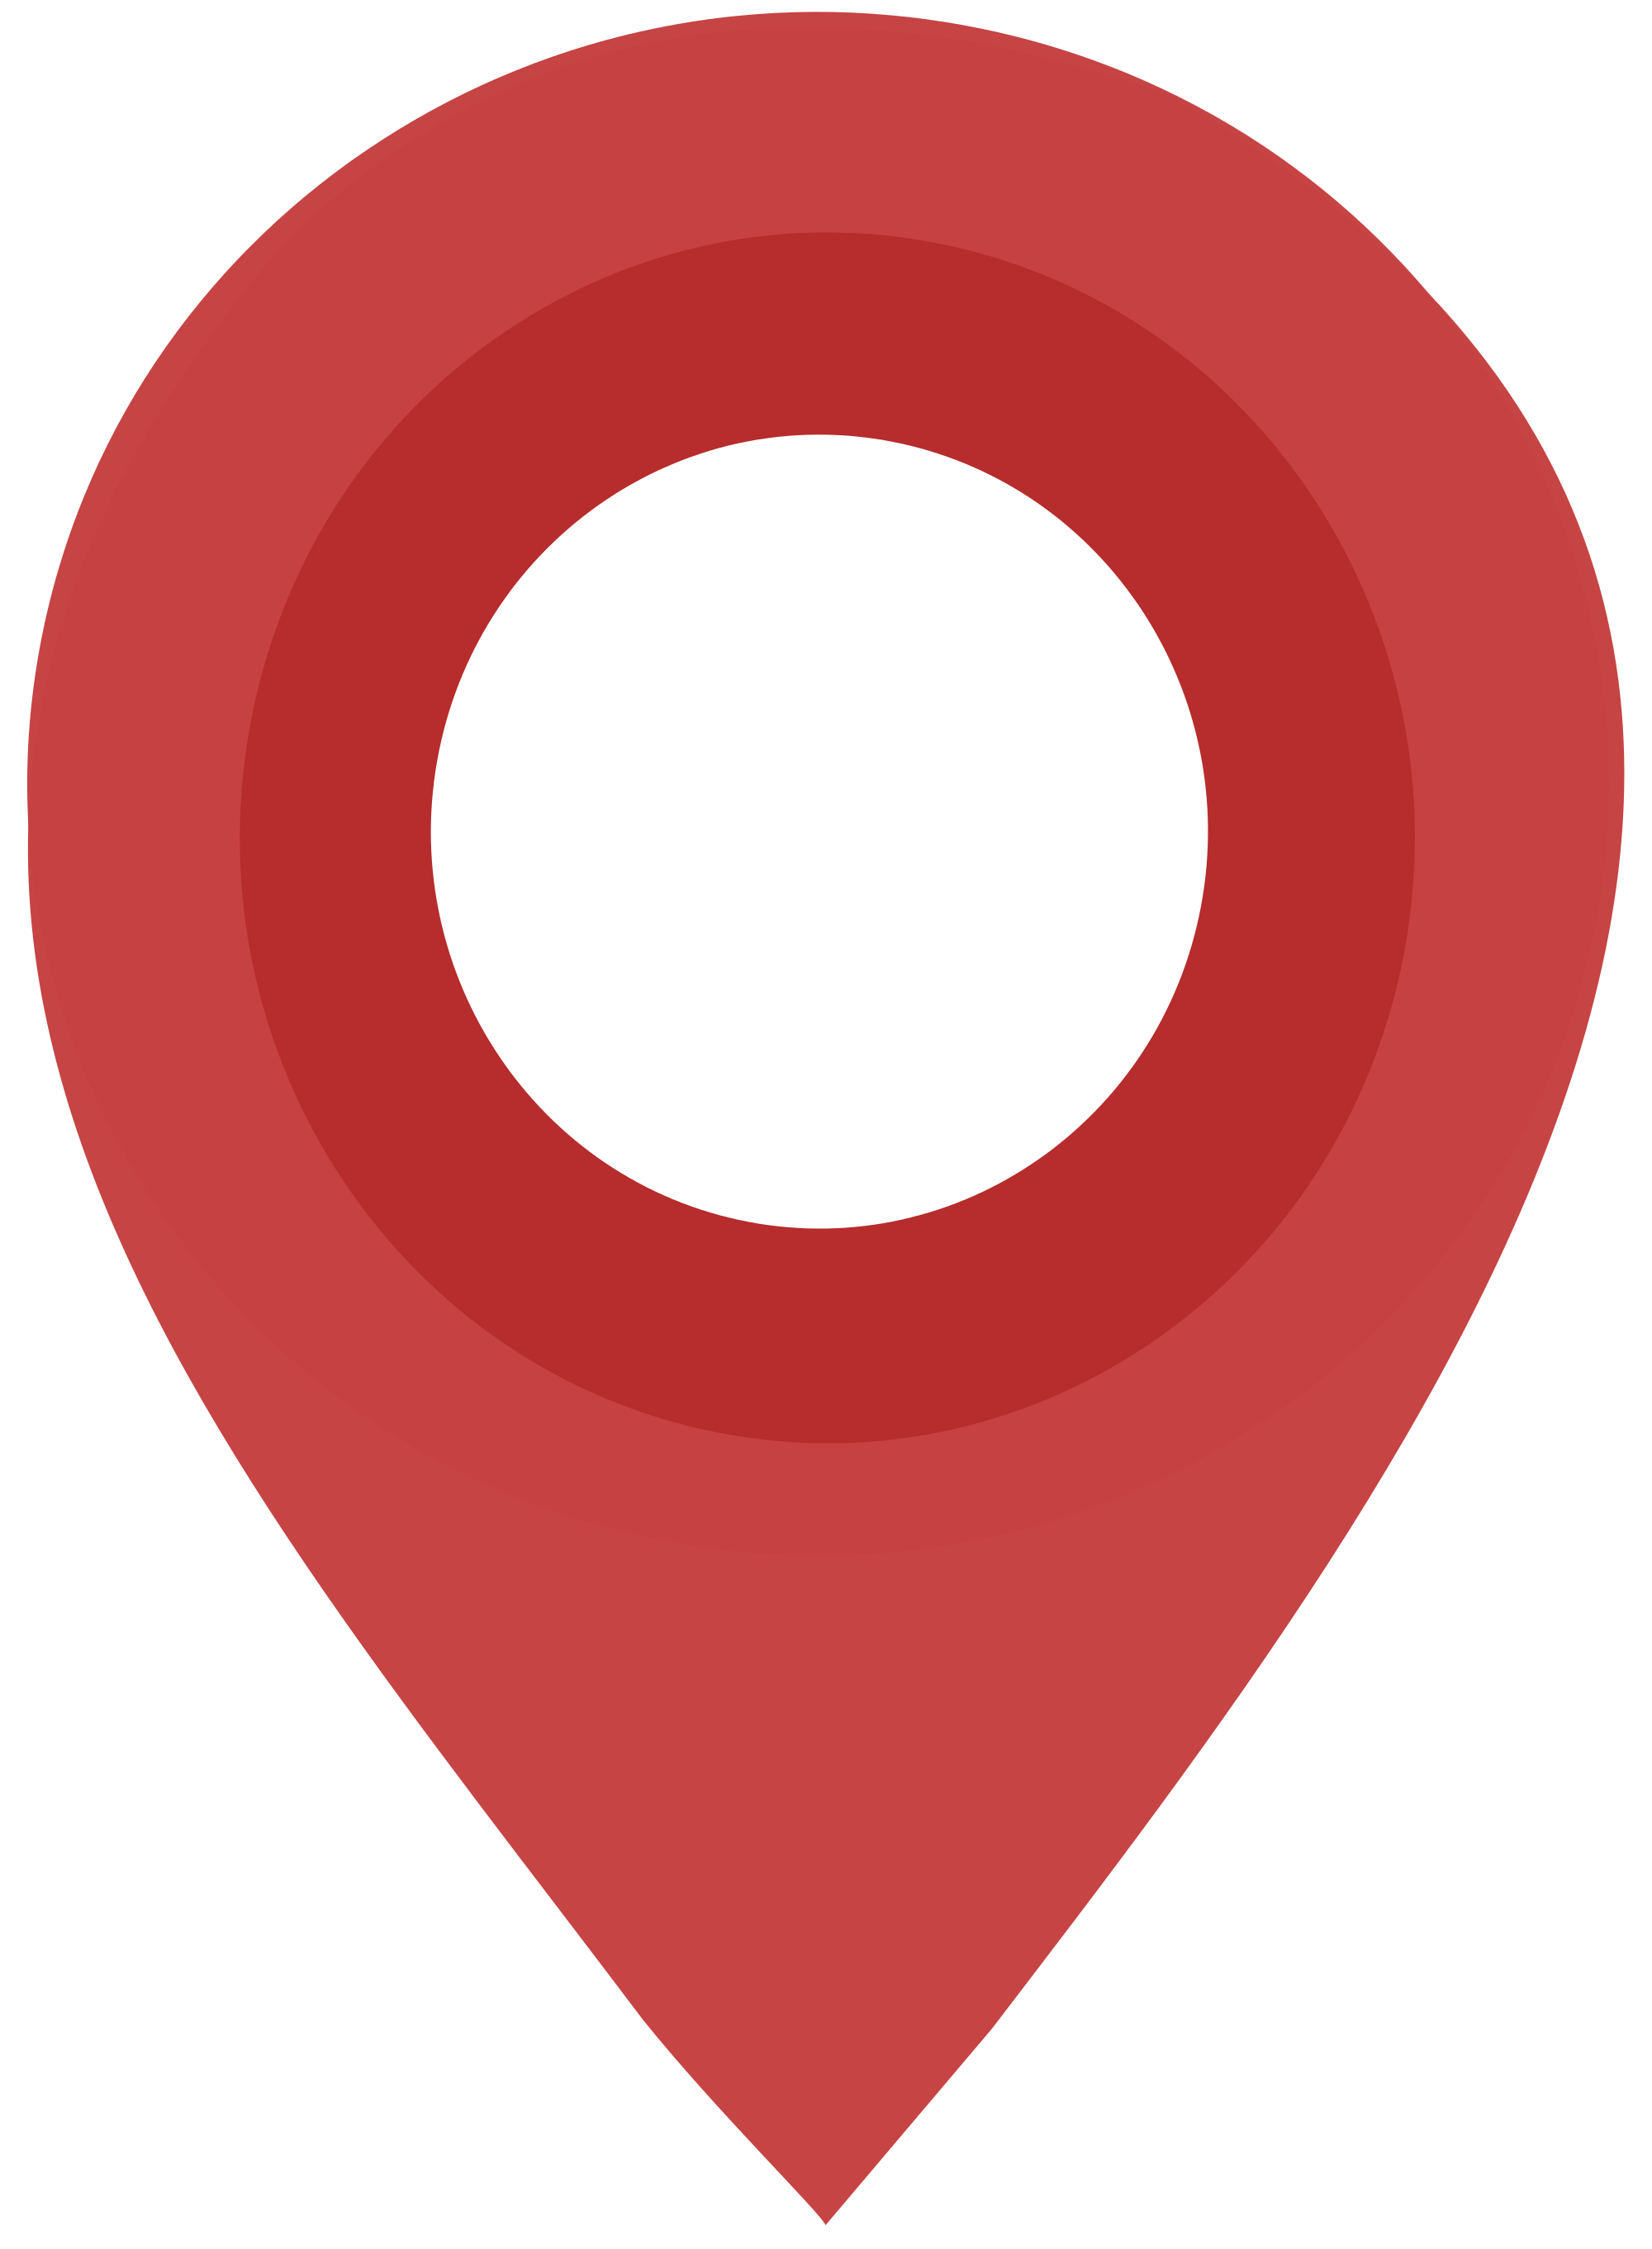 Pins on a map clipart